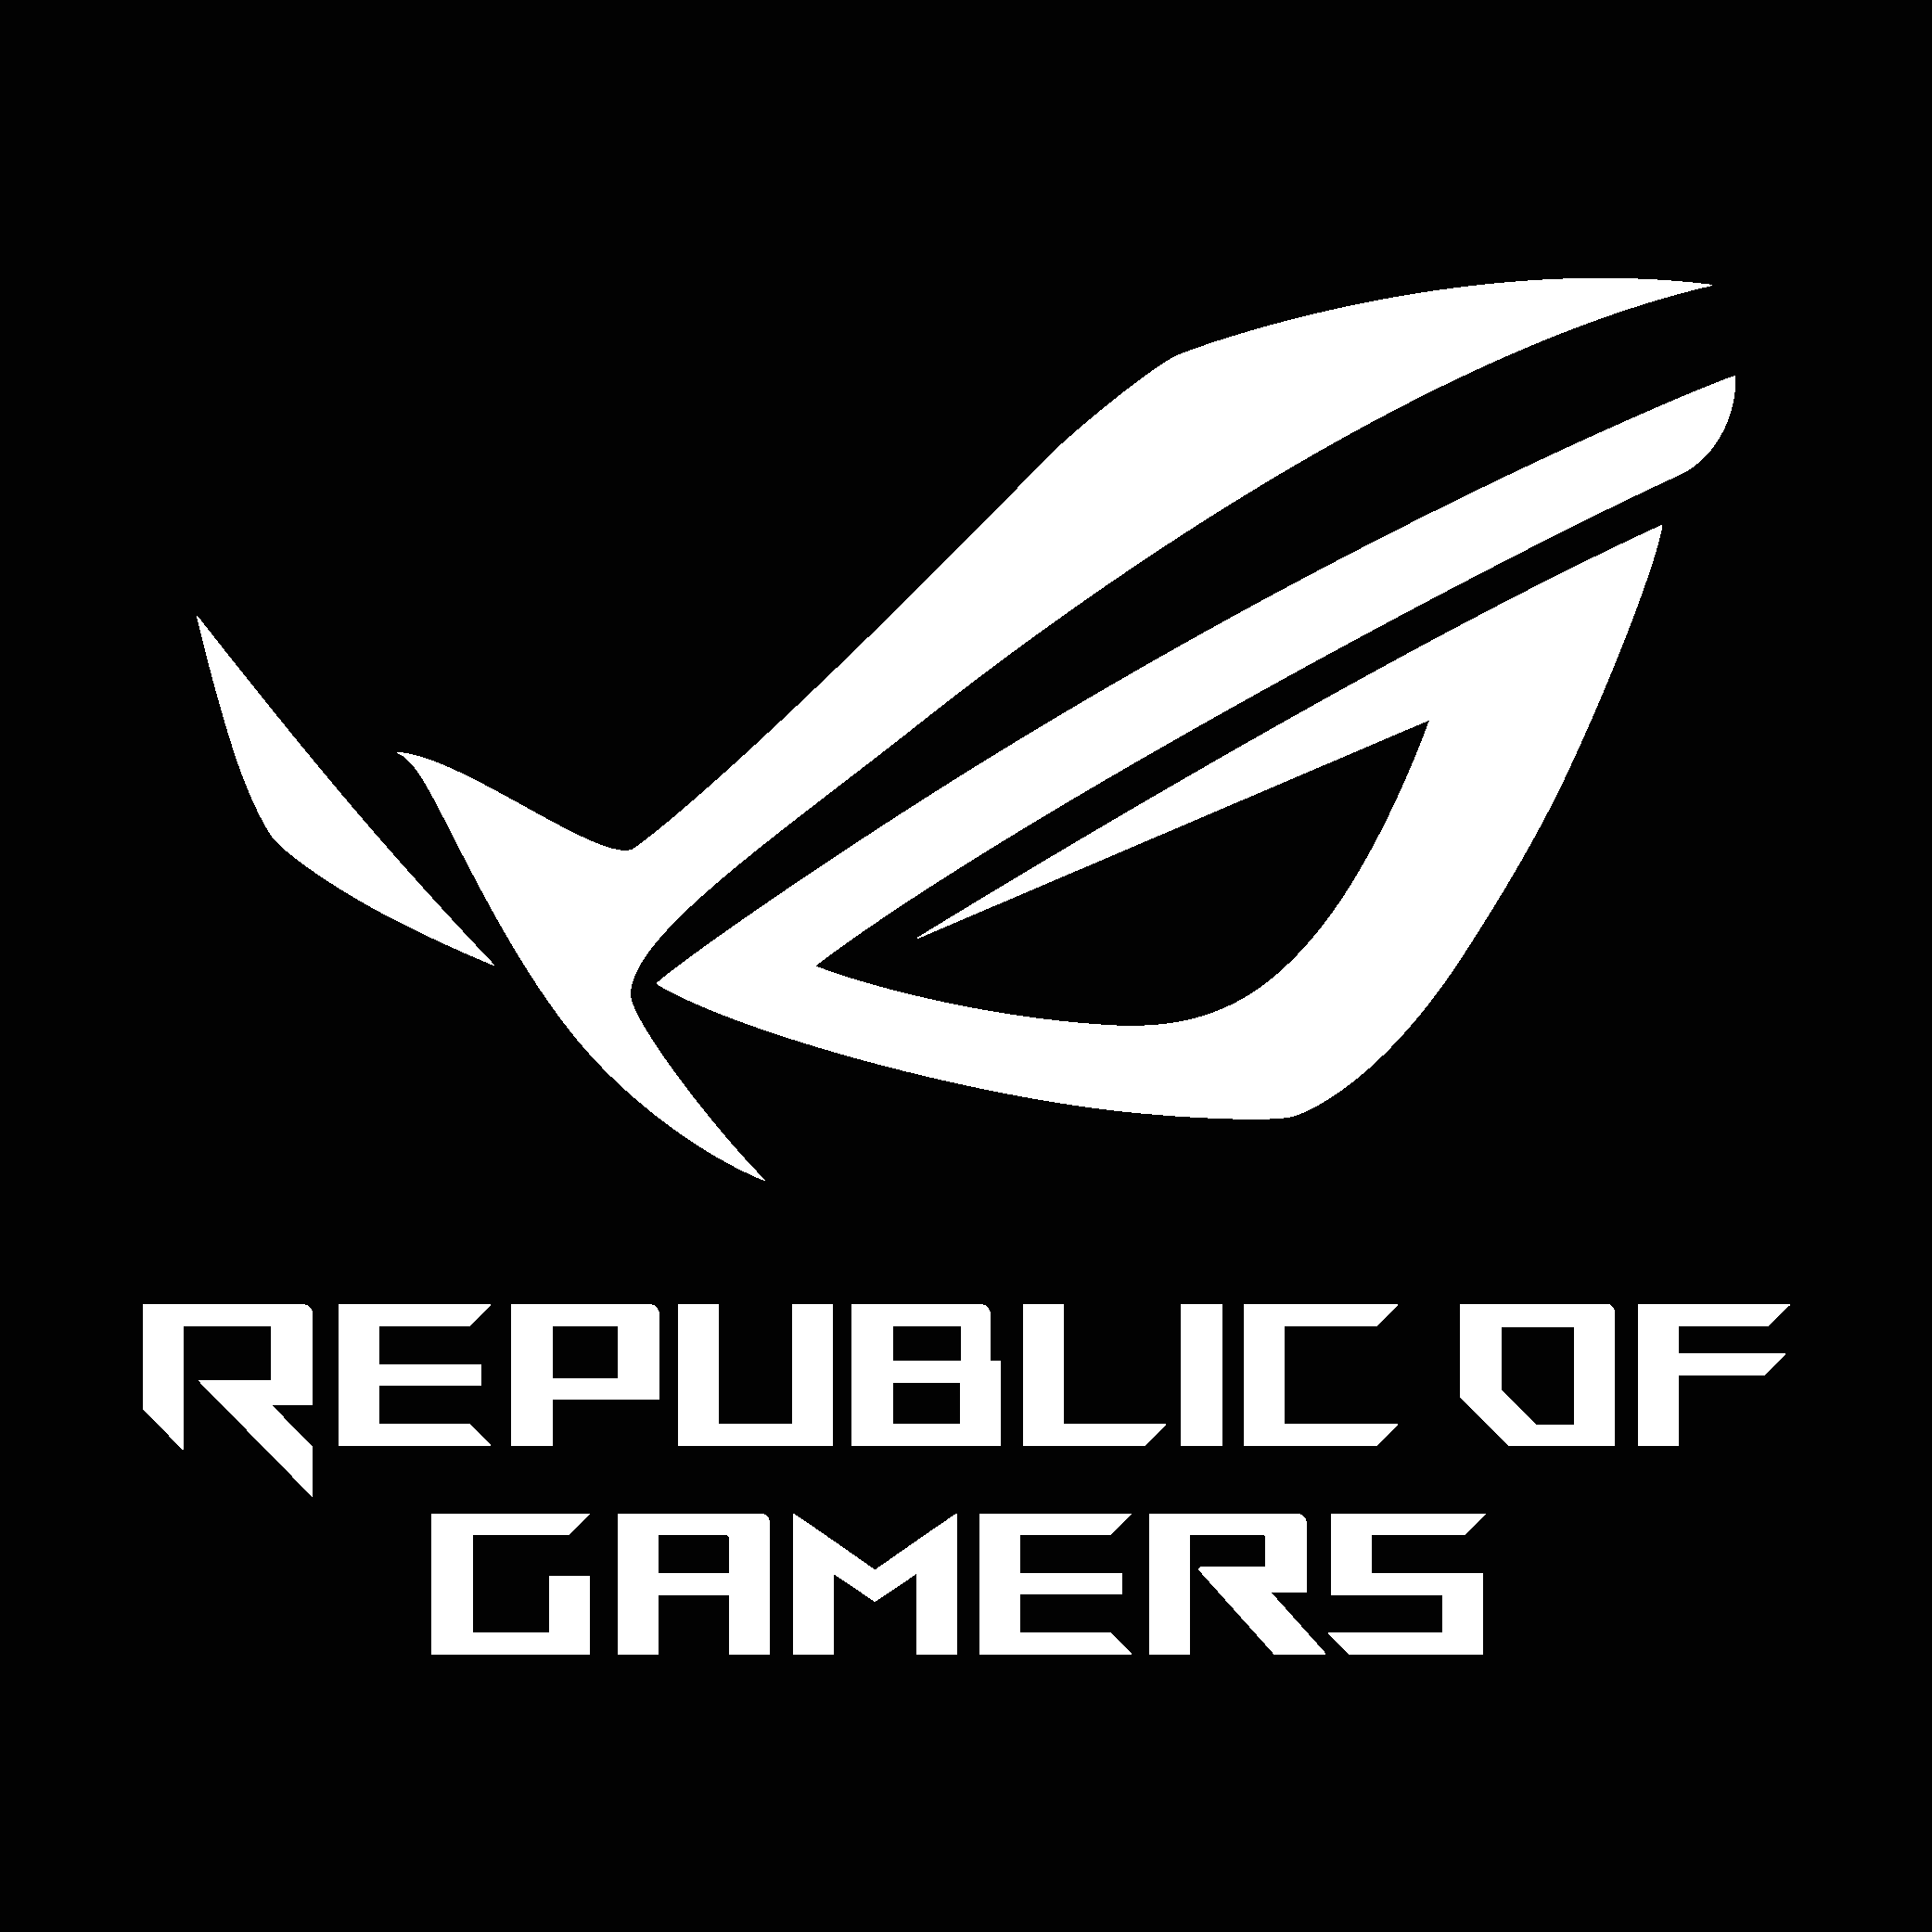 ROG Republic Of Gamers Logo PNG Vector (EPS) Free Download